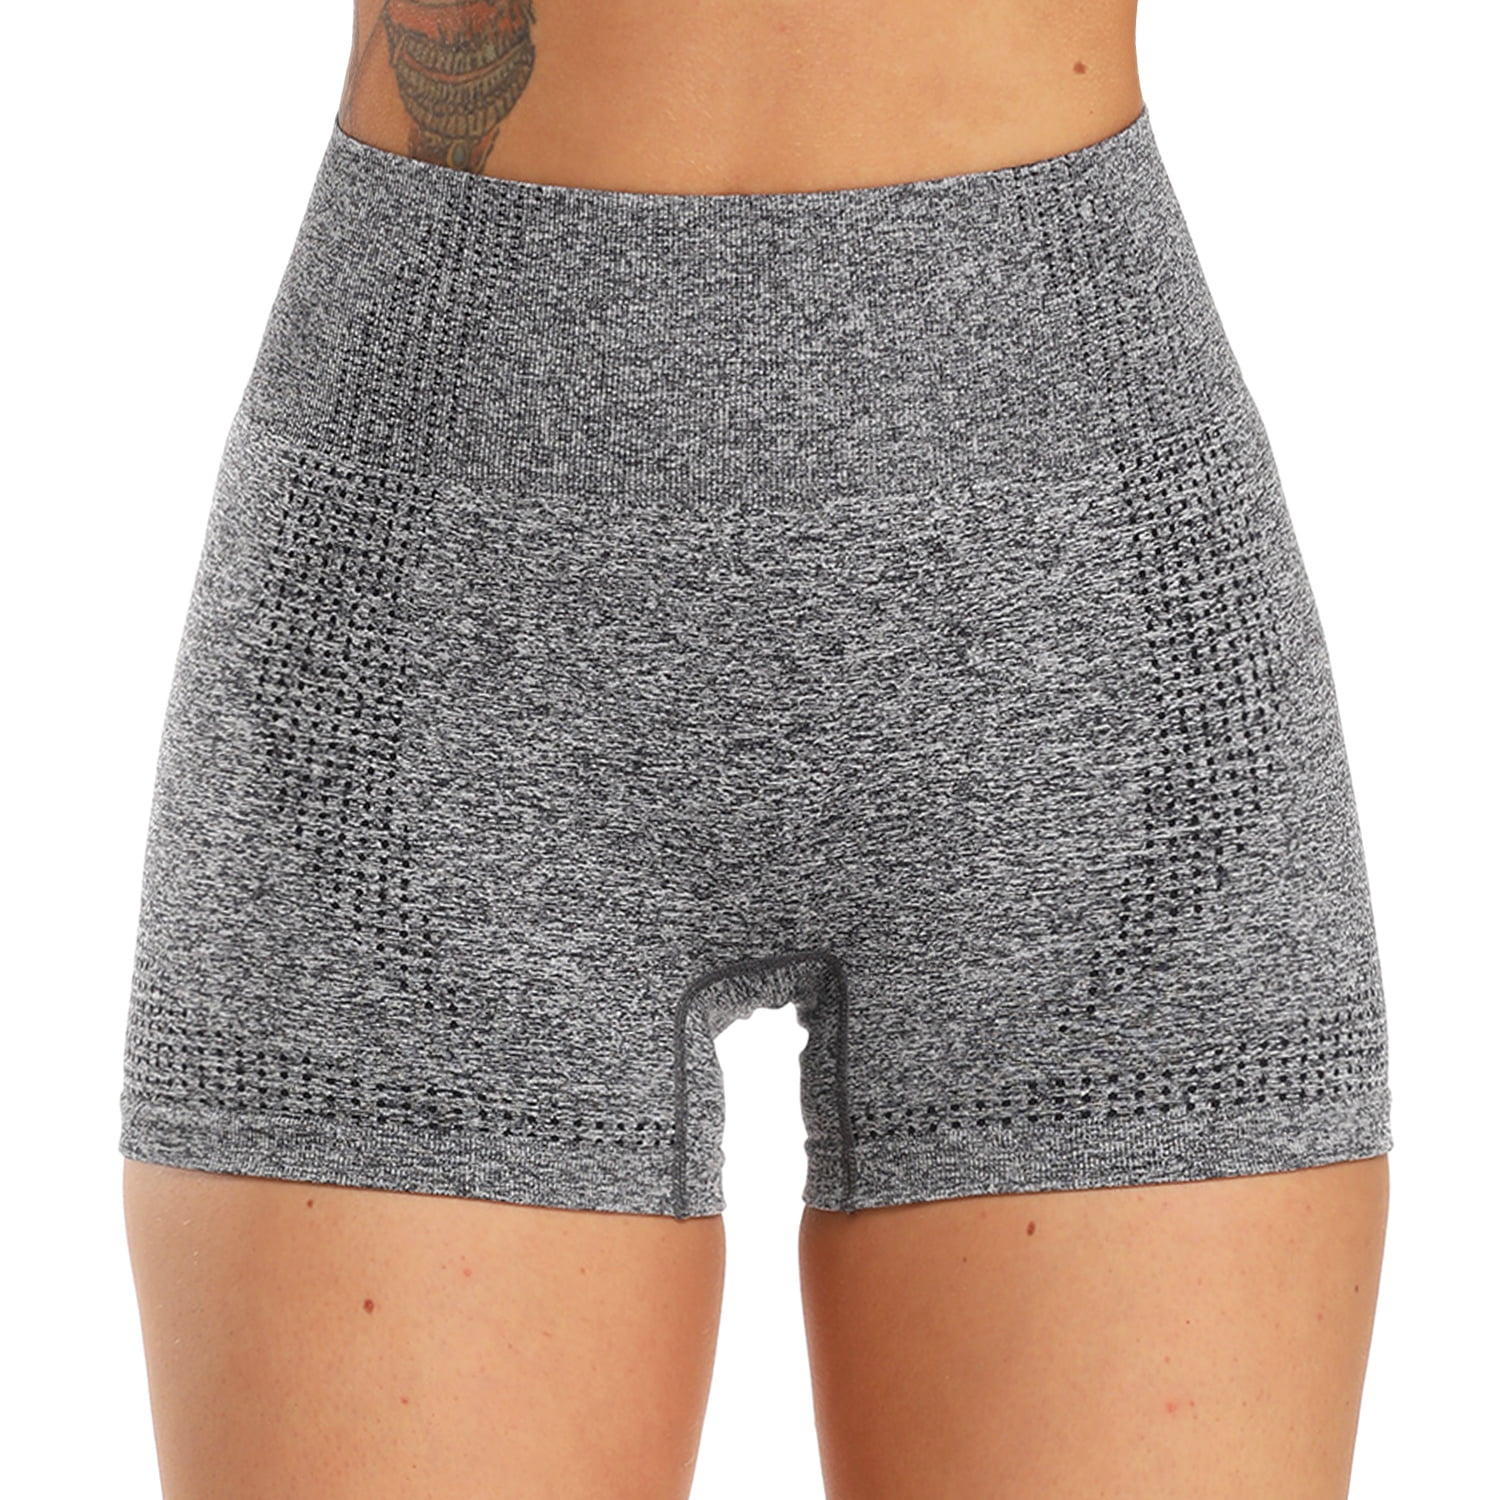 5 Day Female Workout Shorts for Gym